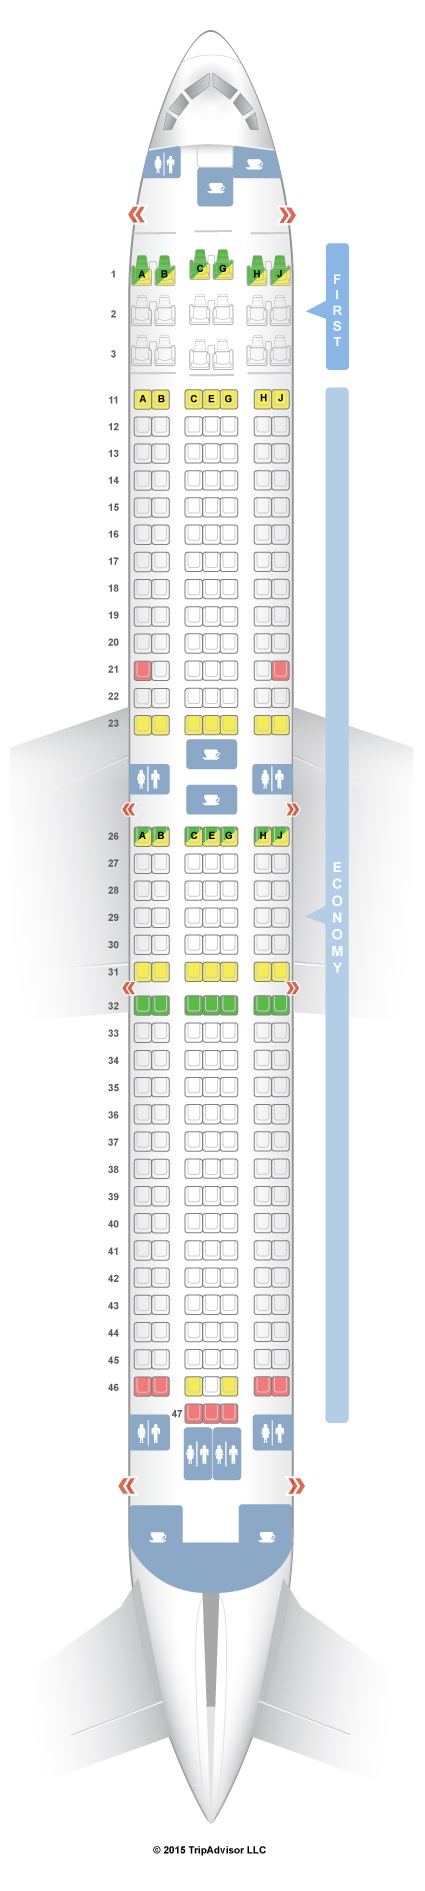 hawaiian airlines seat assignments